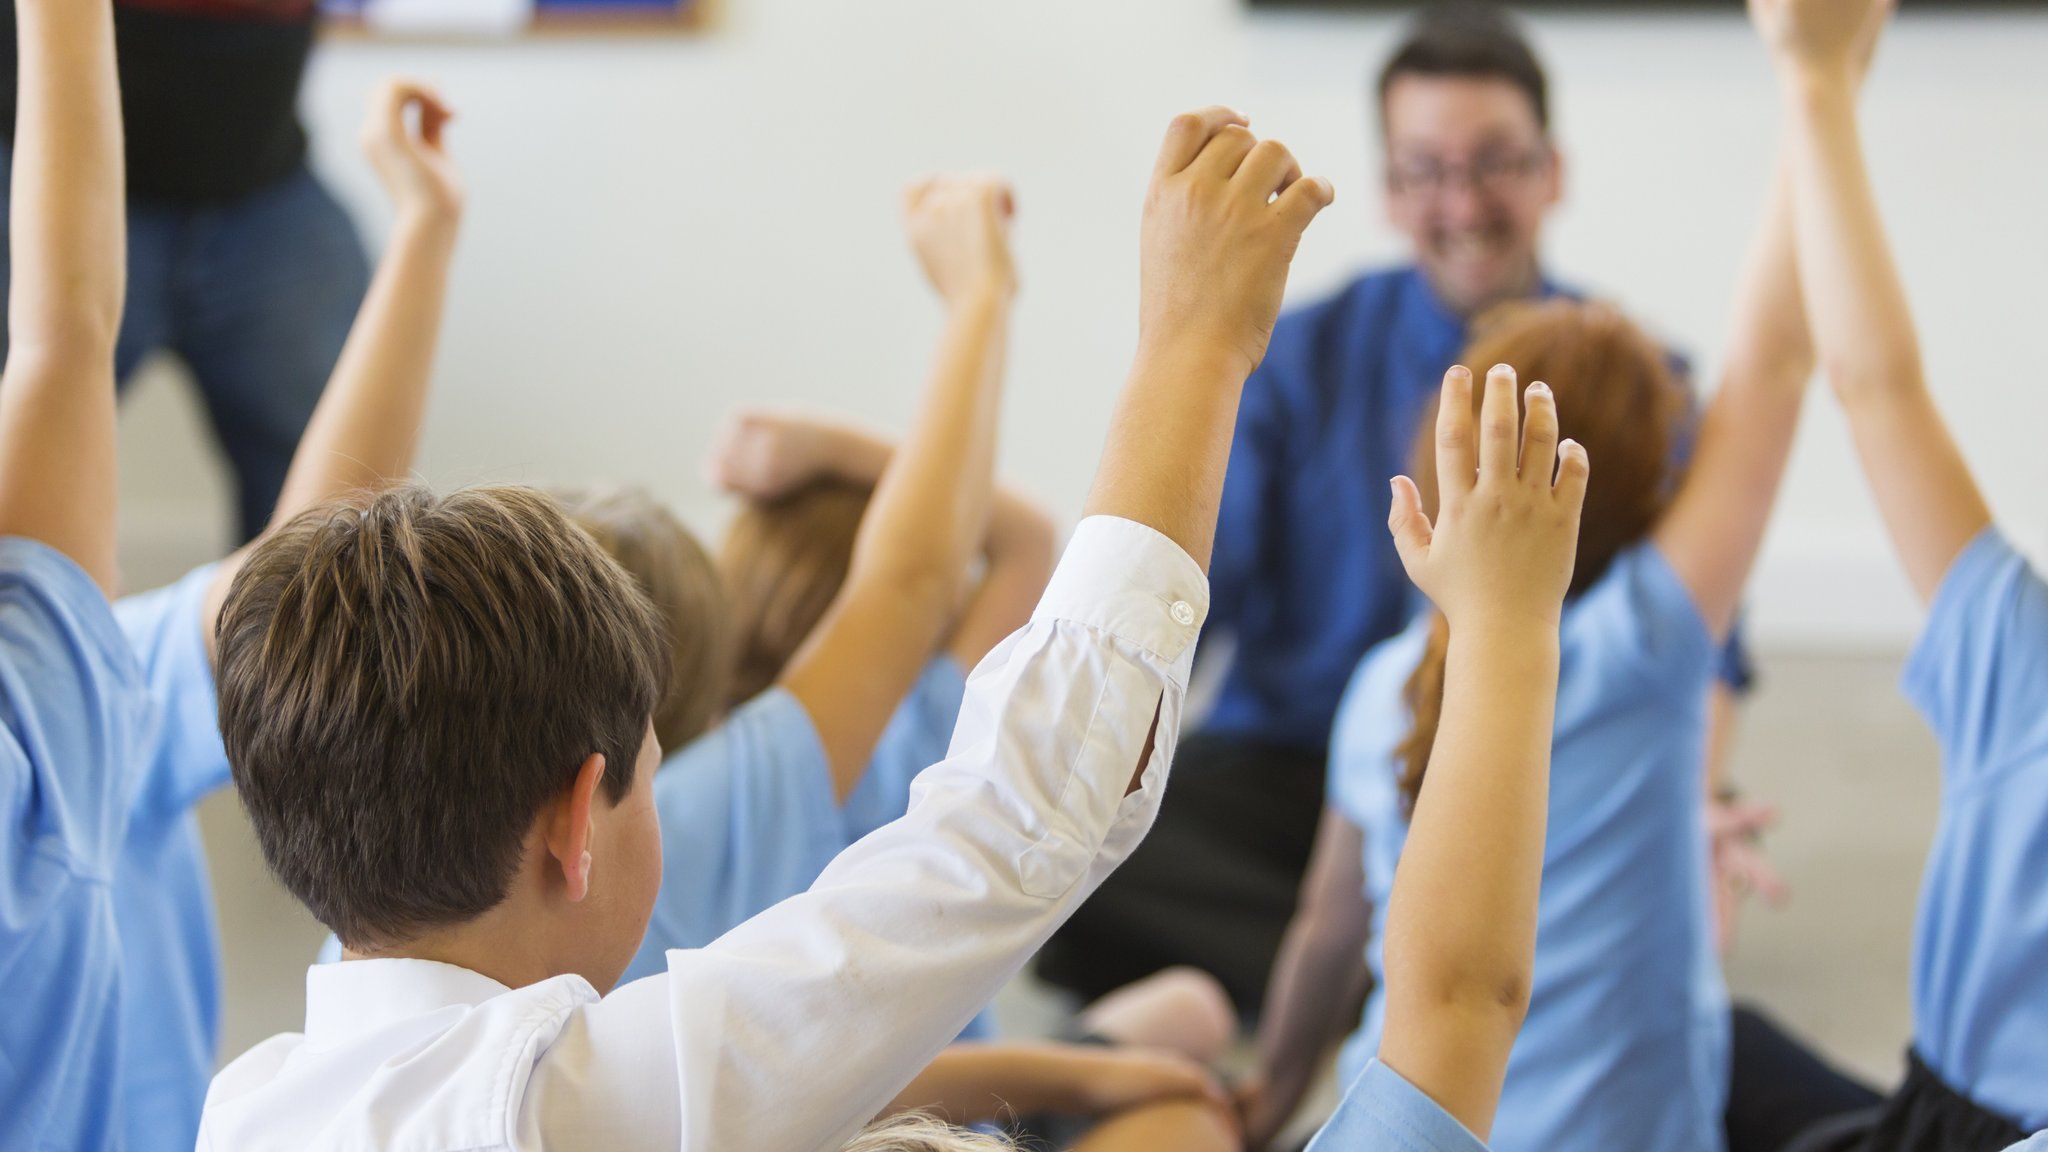 Stock photo of children in a classroom.